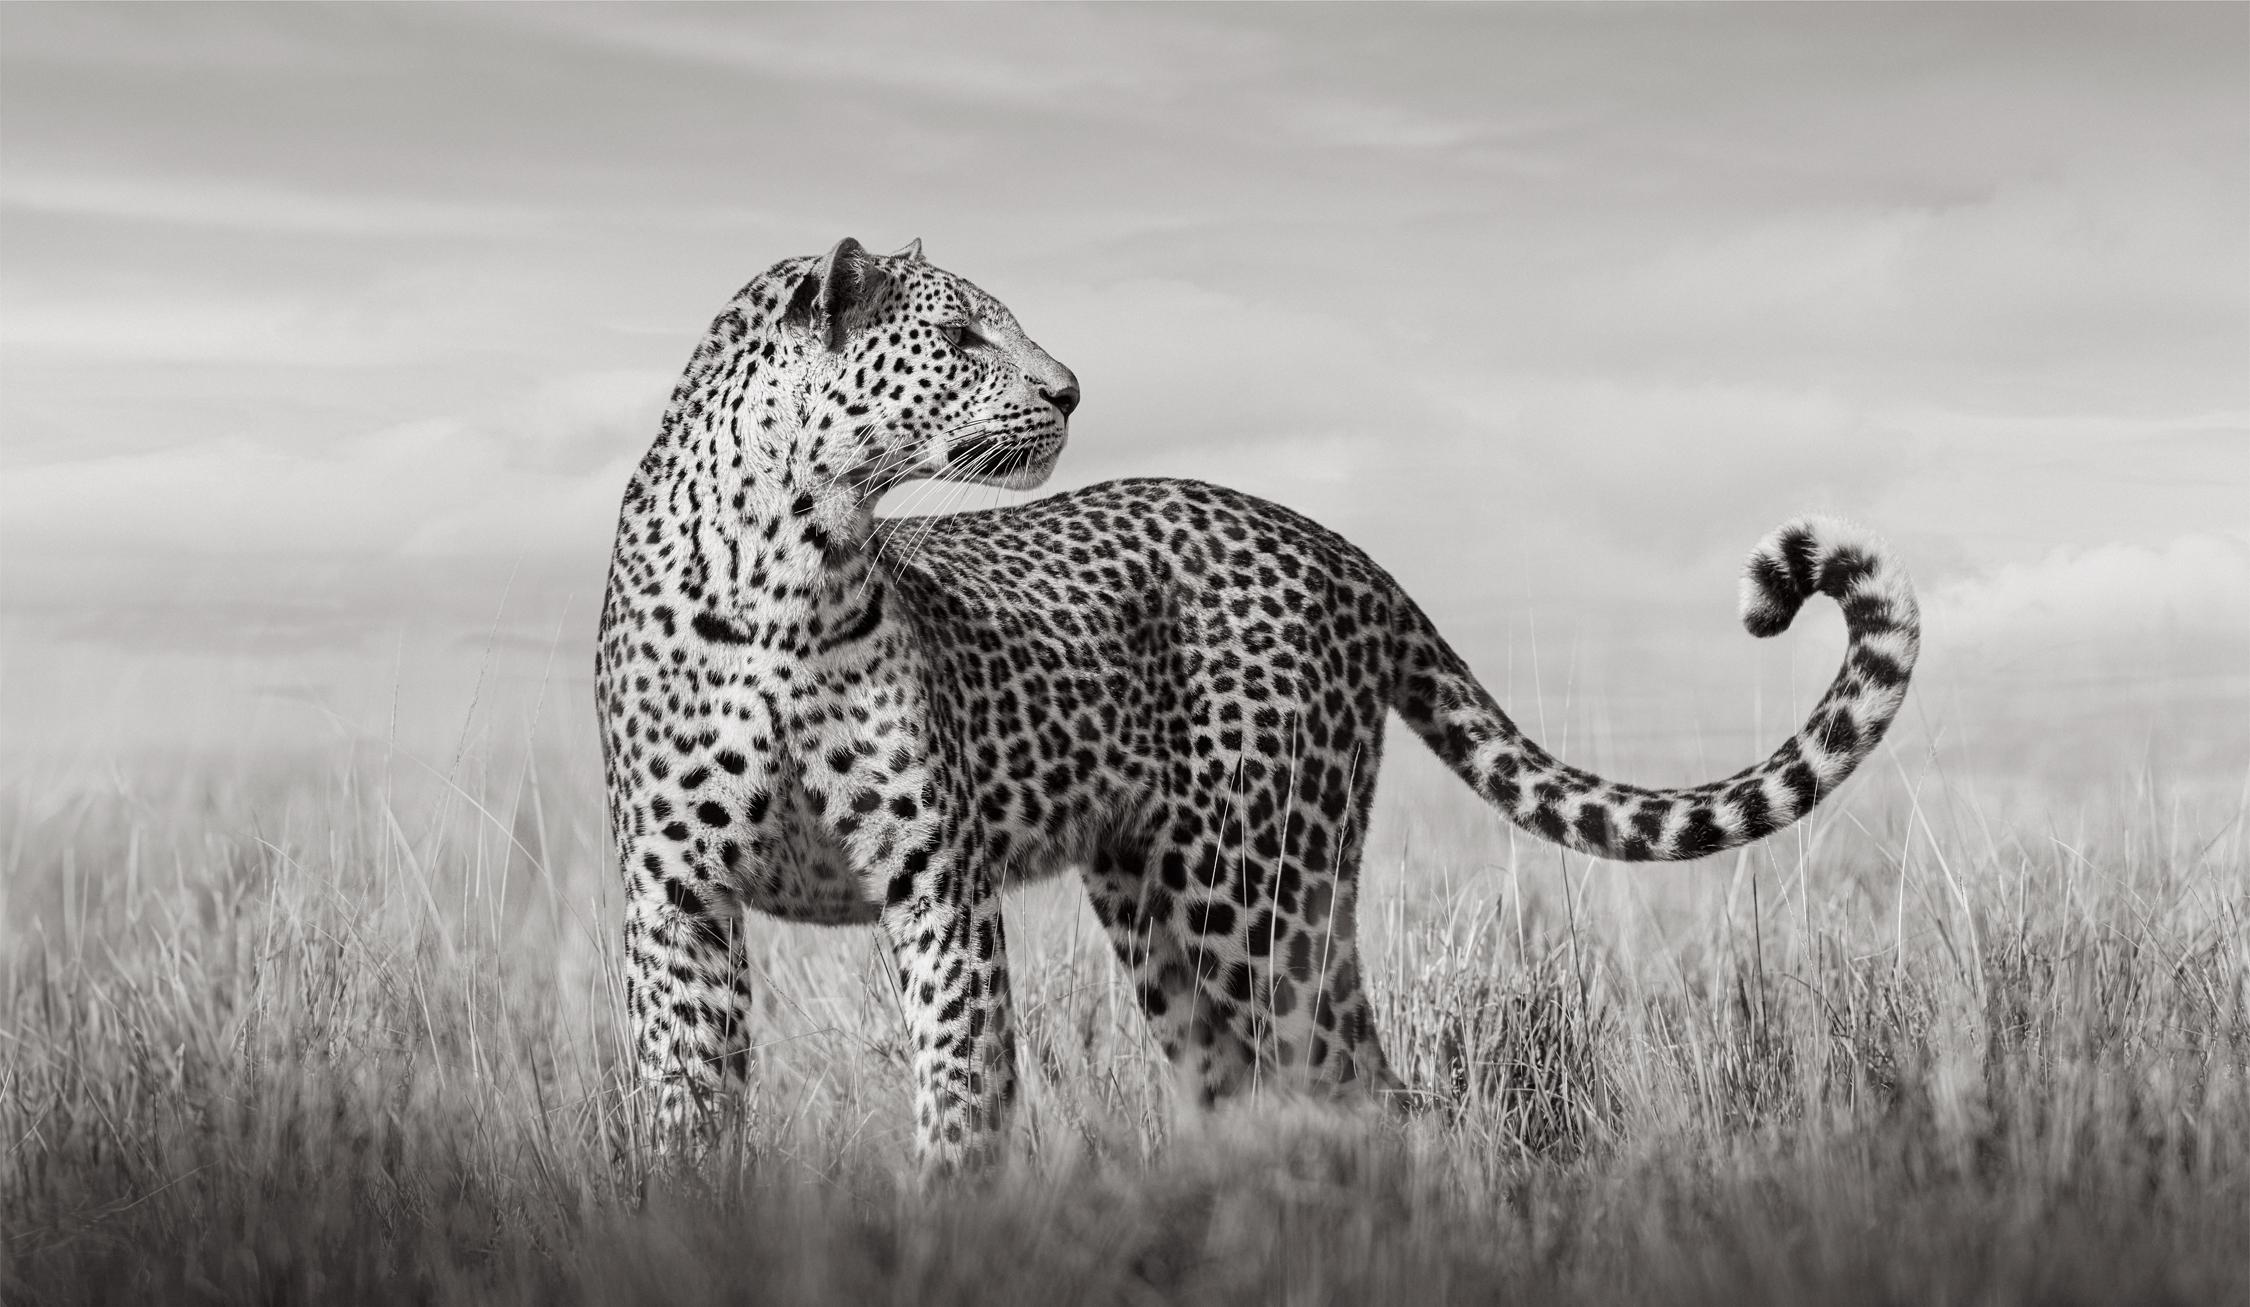 A leopard stands in the tall grass of Kenya looking at something out of sight